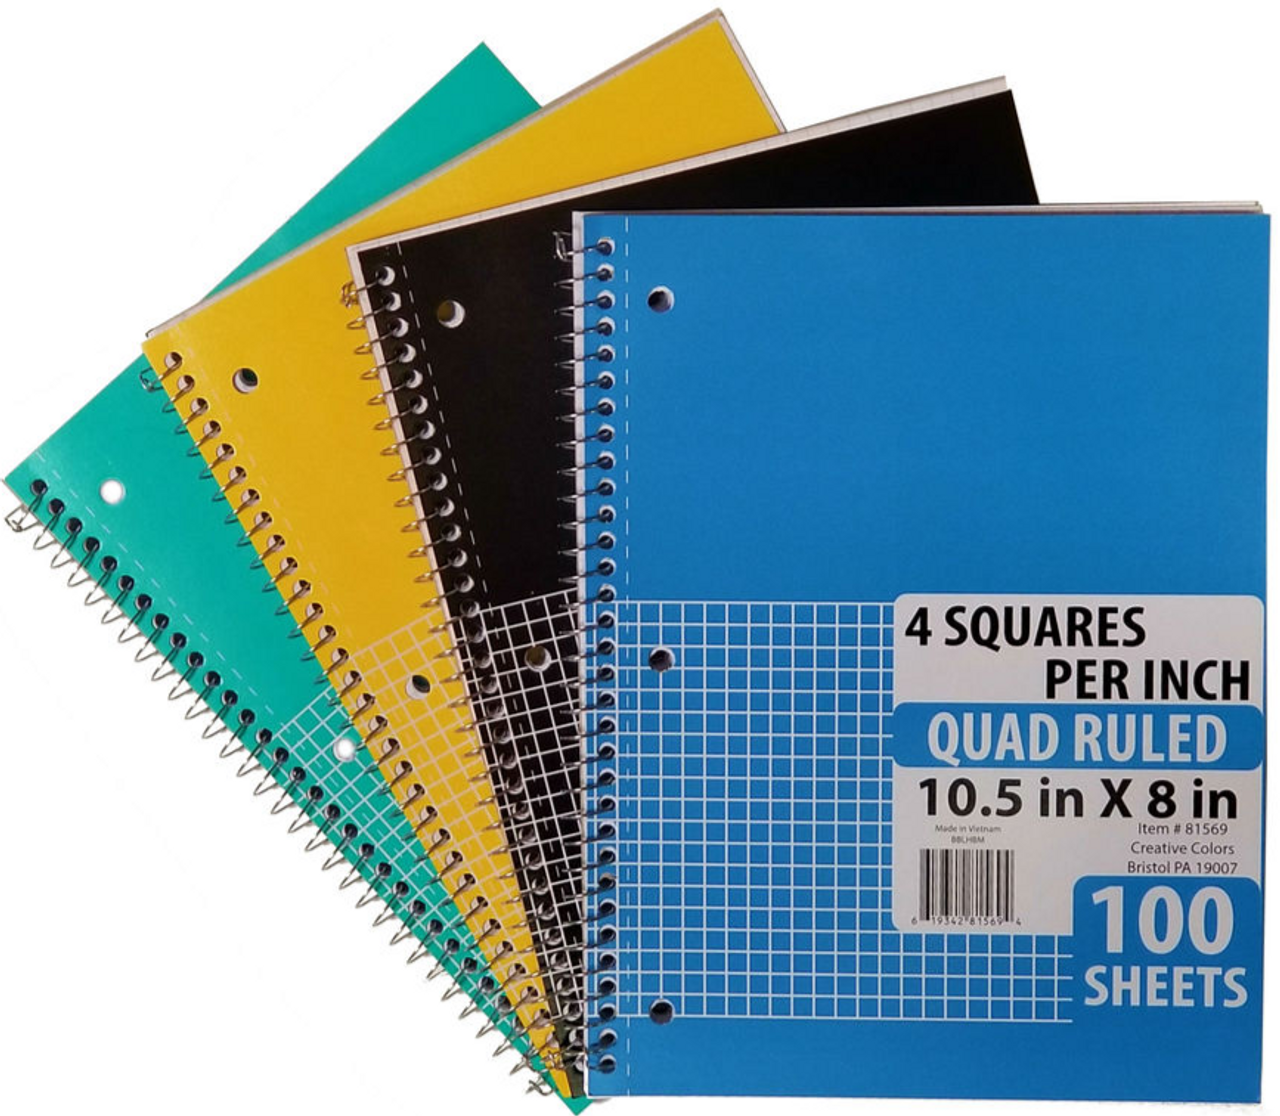 Oxford 1-Subject College Ruled Notebook, Coil Lock - 100 Sheets